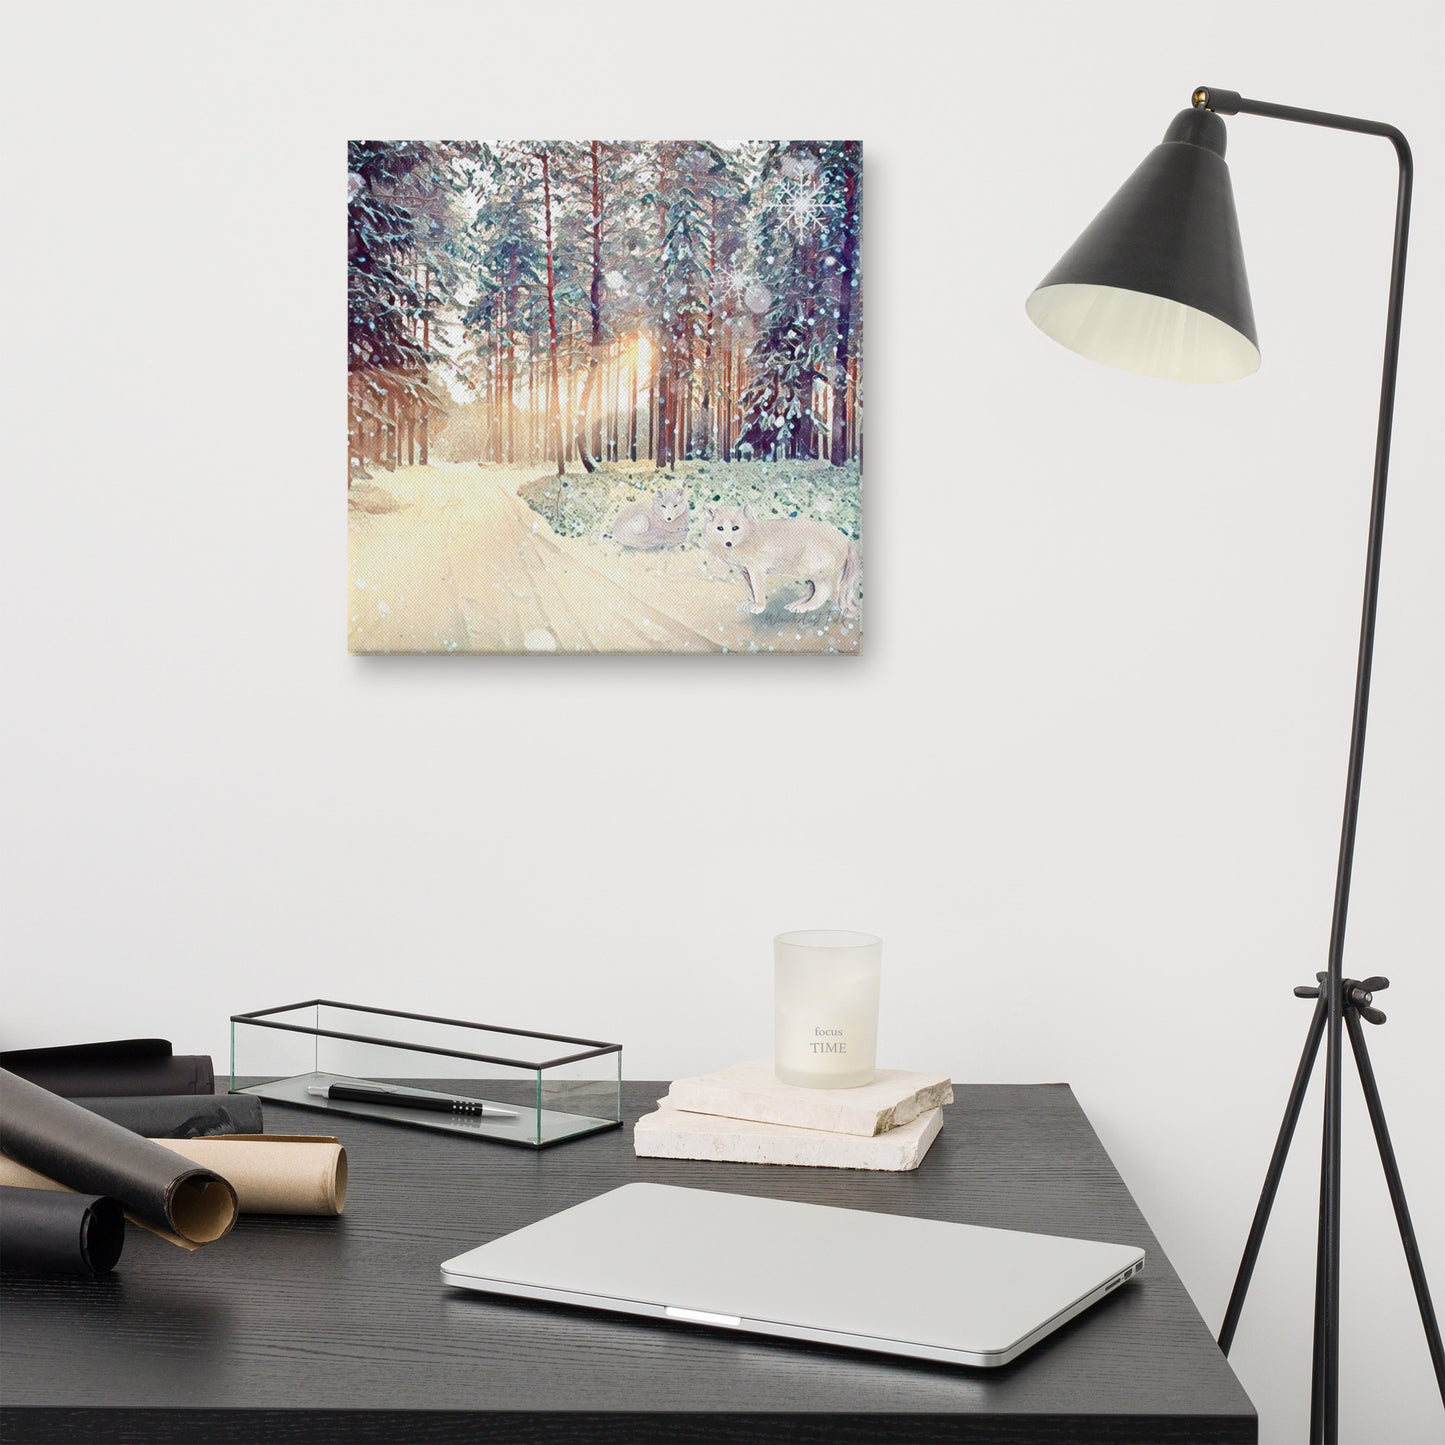 Snowy Fox Forest | Canvas Painting Print